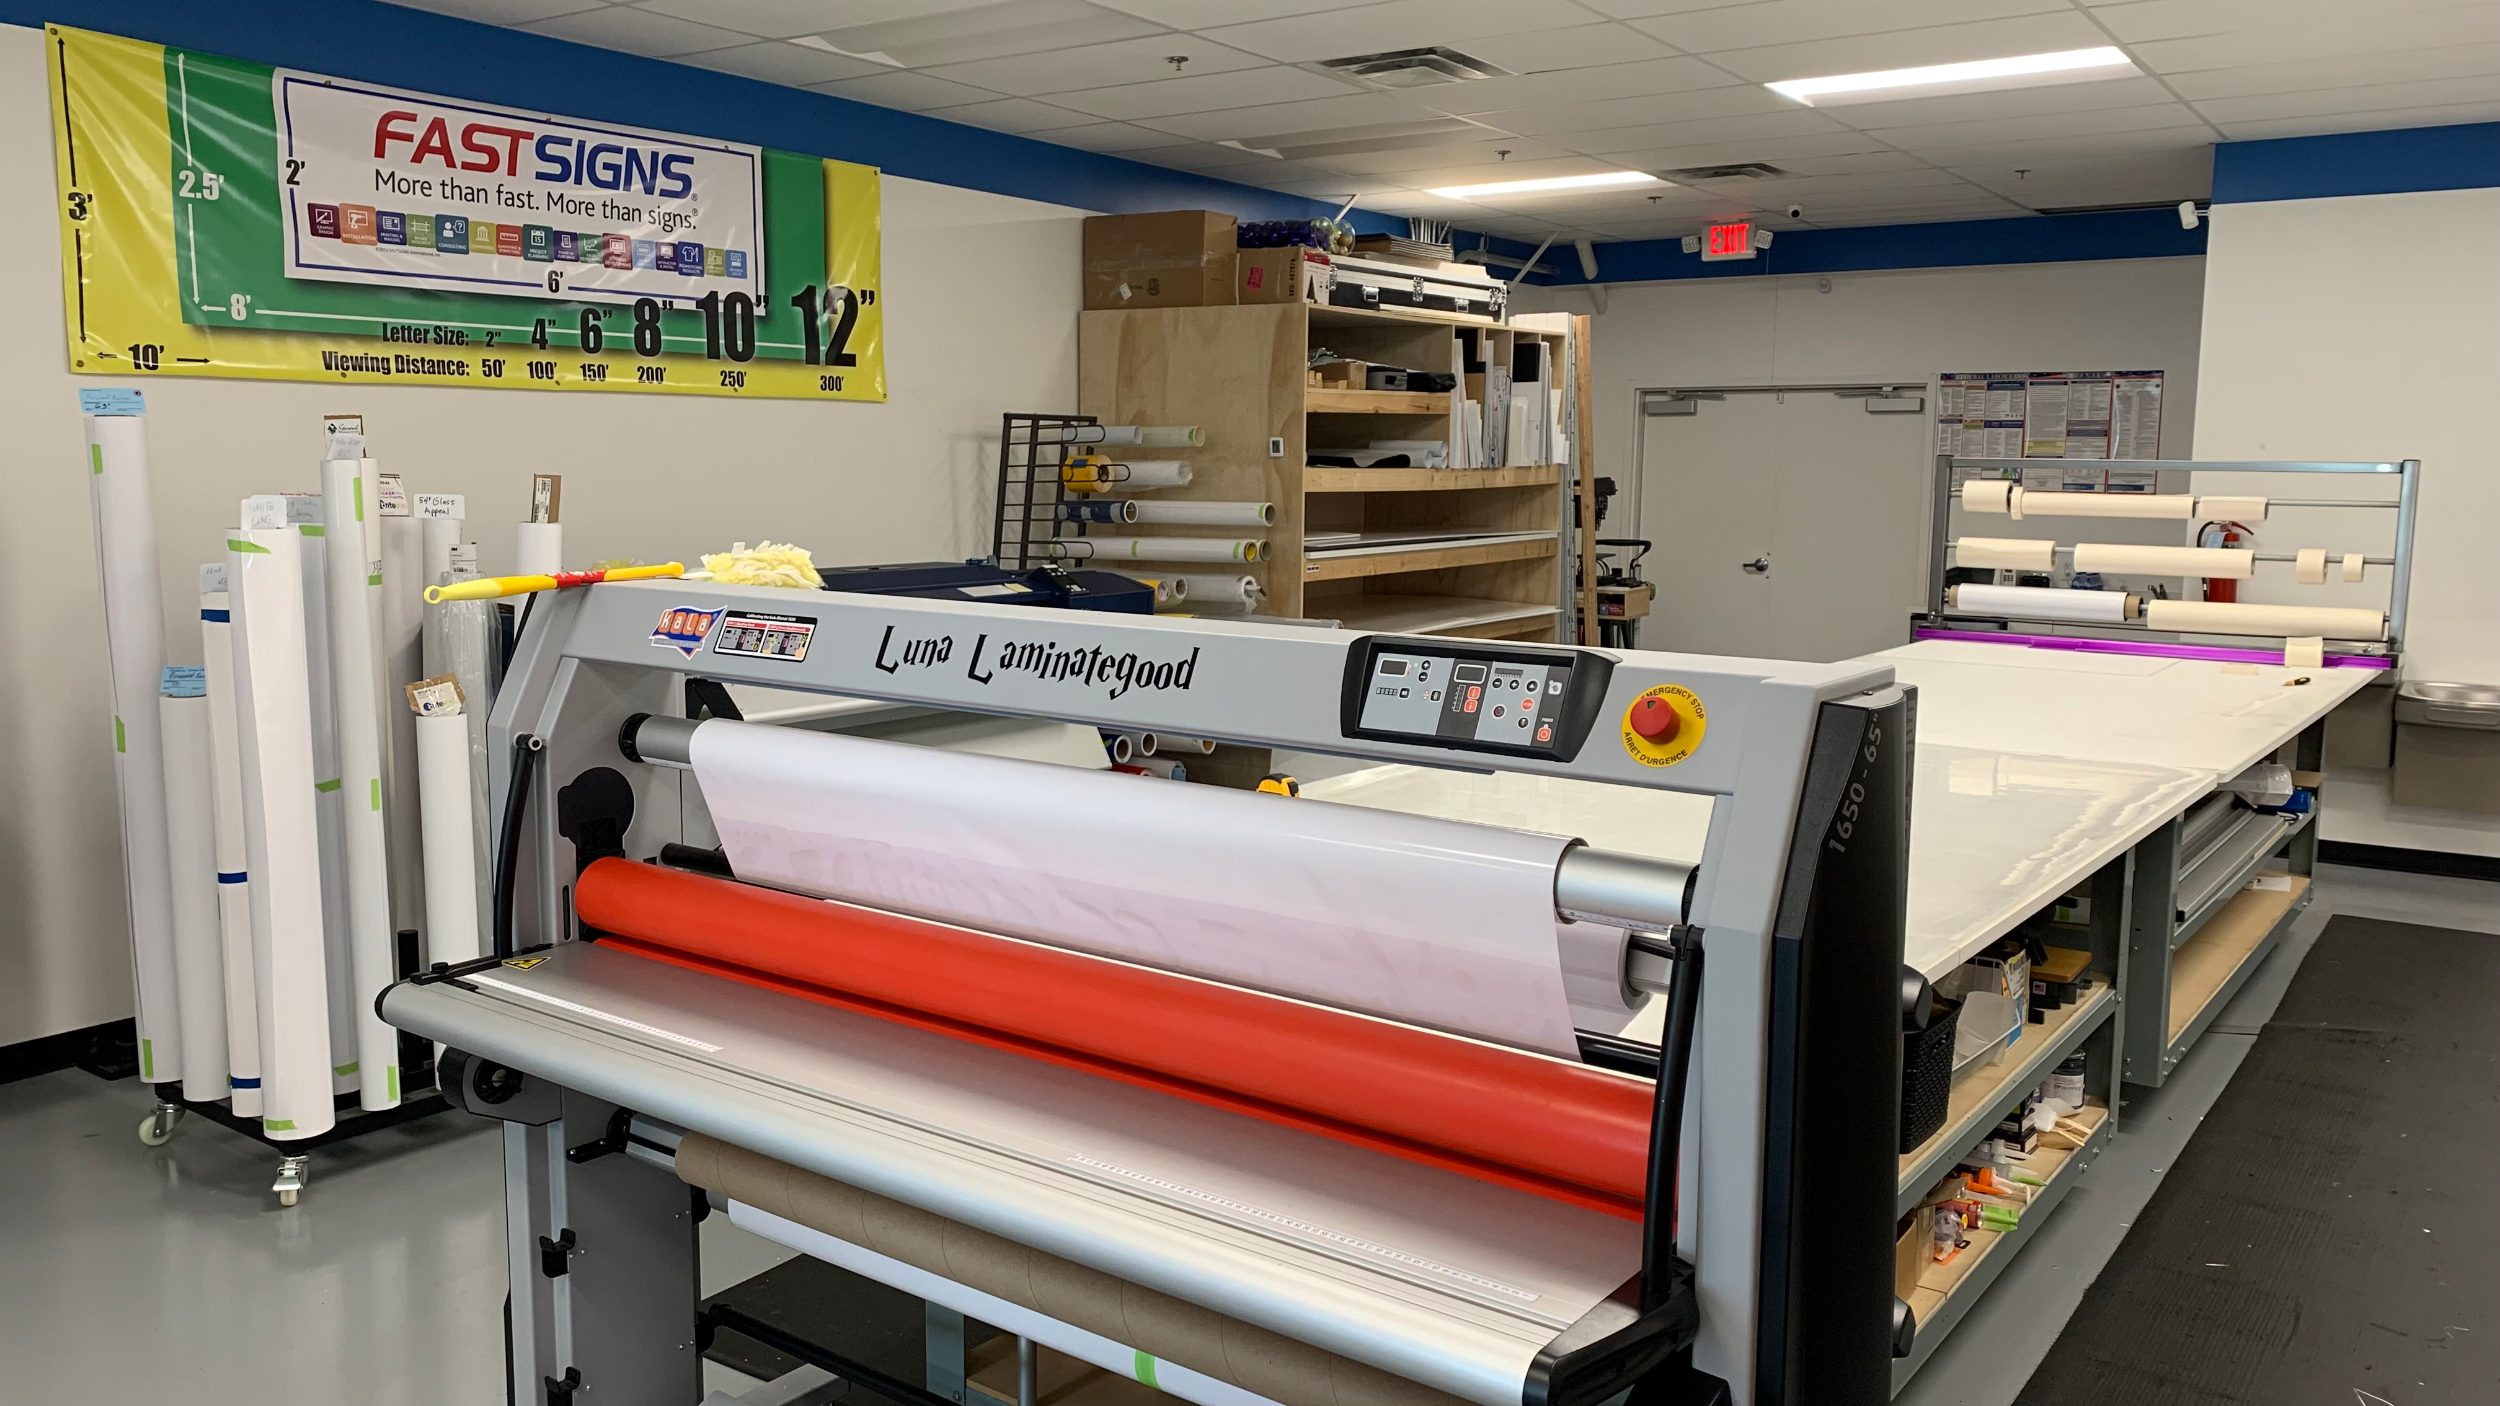 A look at the printing supplies and laminating equipment inside the shop.